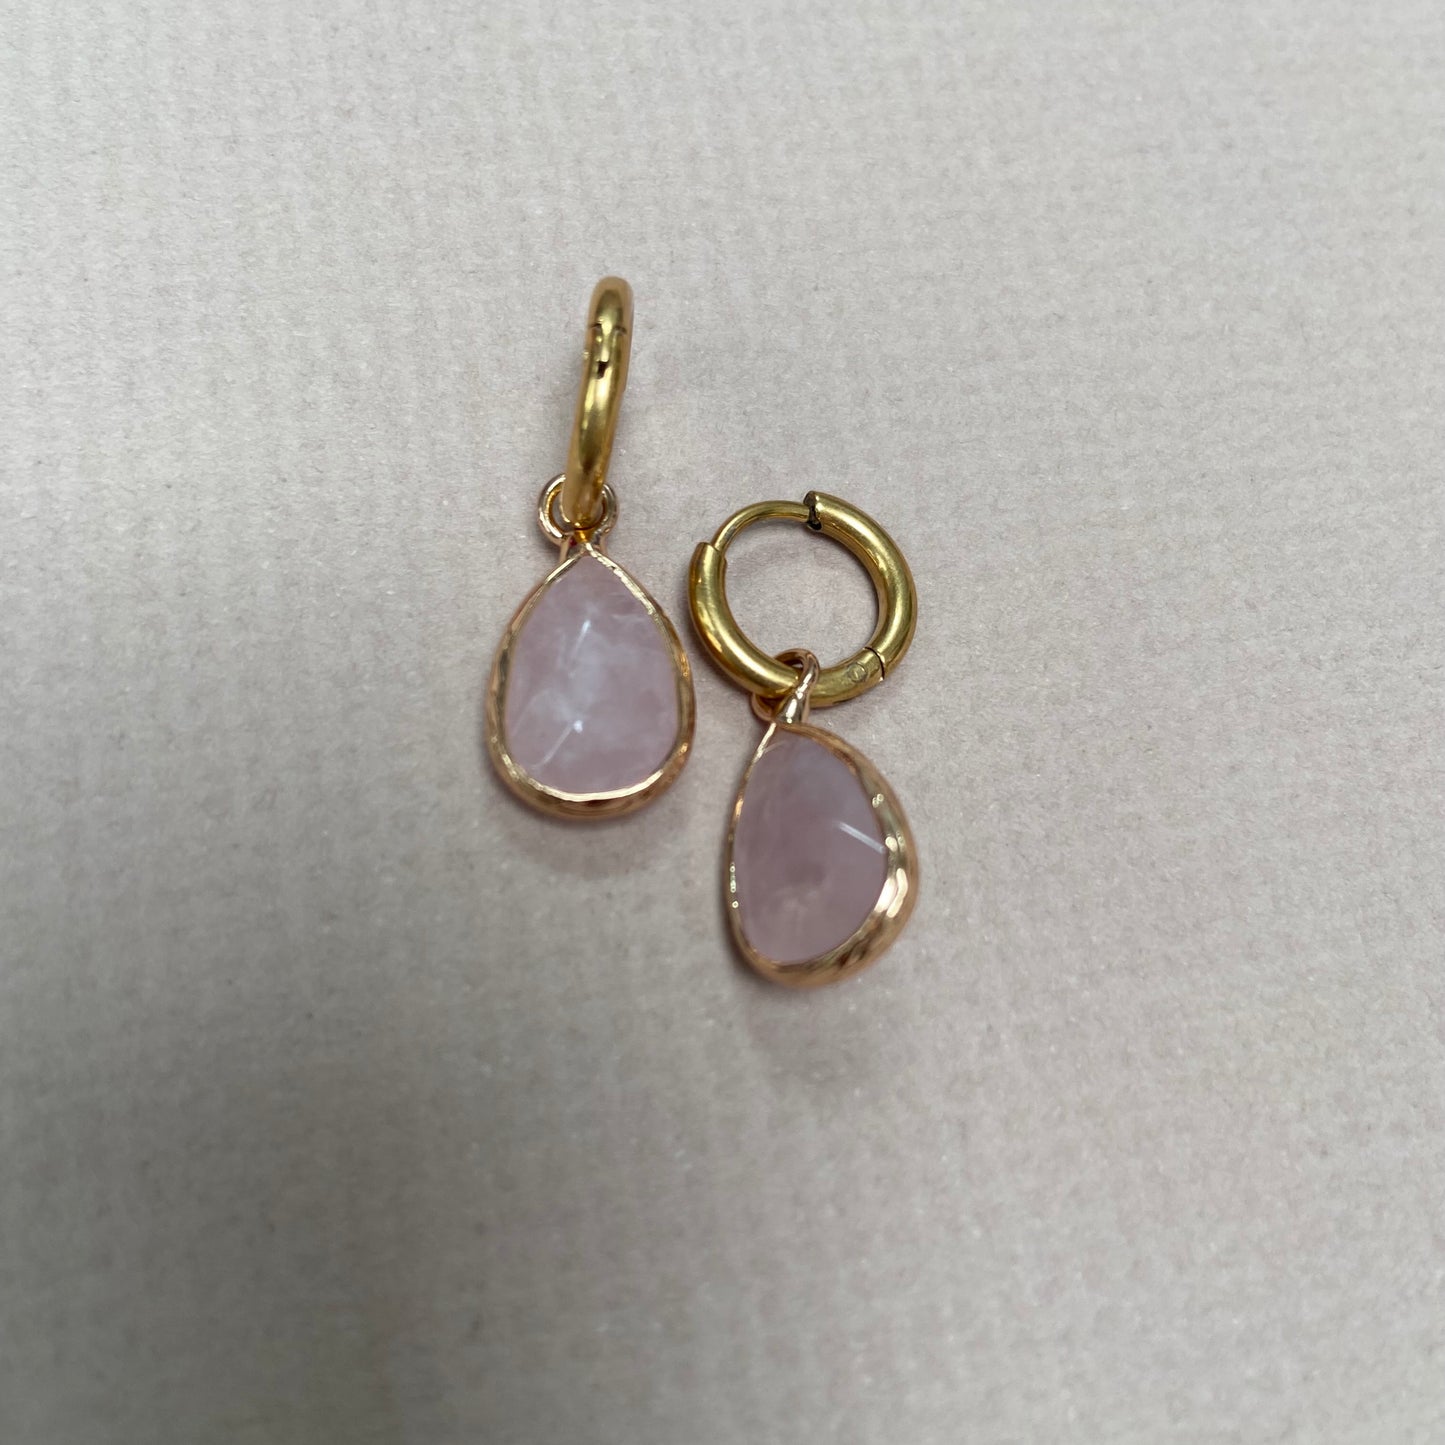 Gold Drop Earrings with Pink Stone